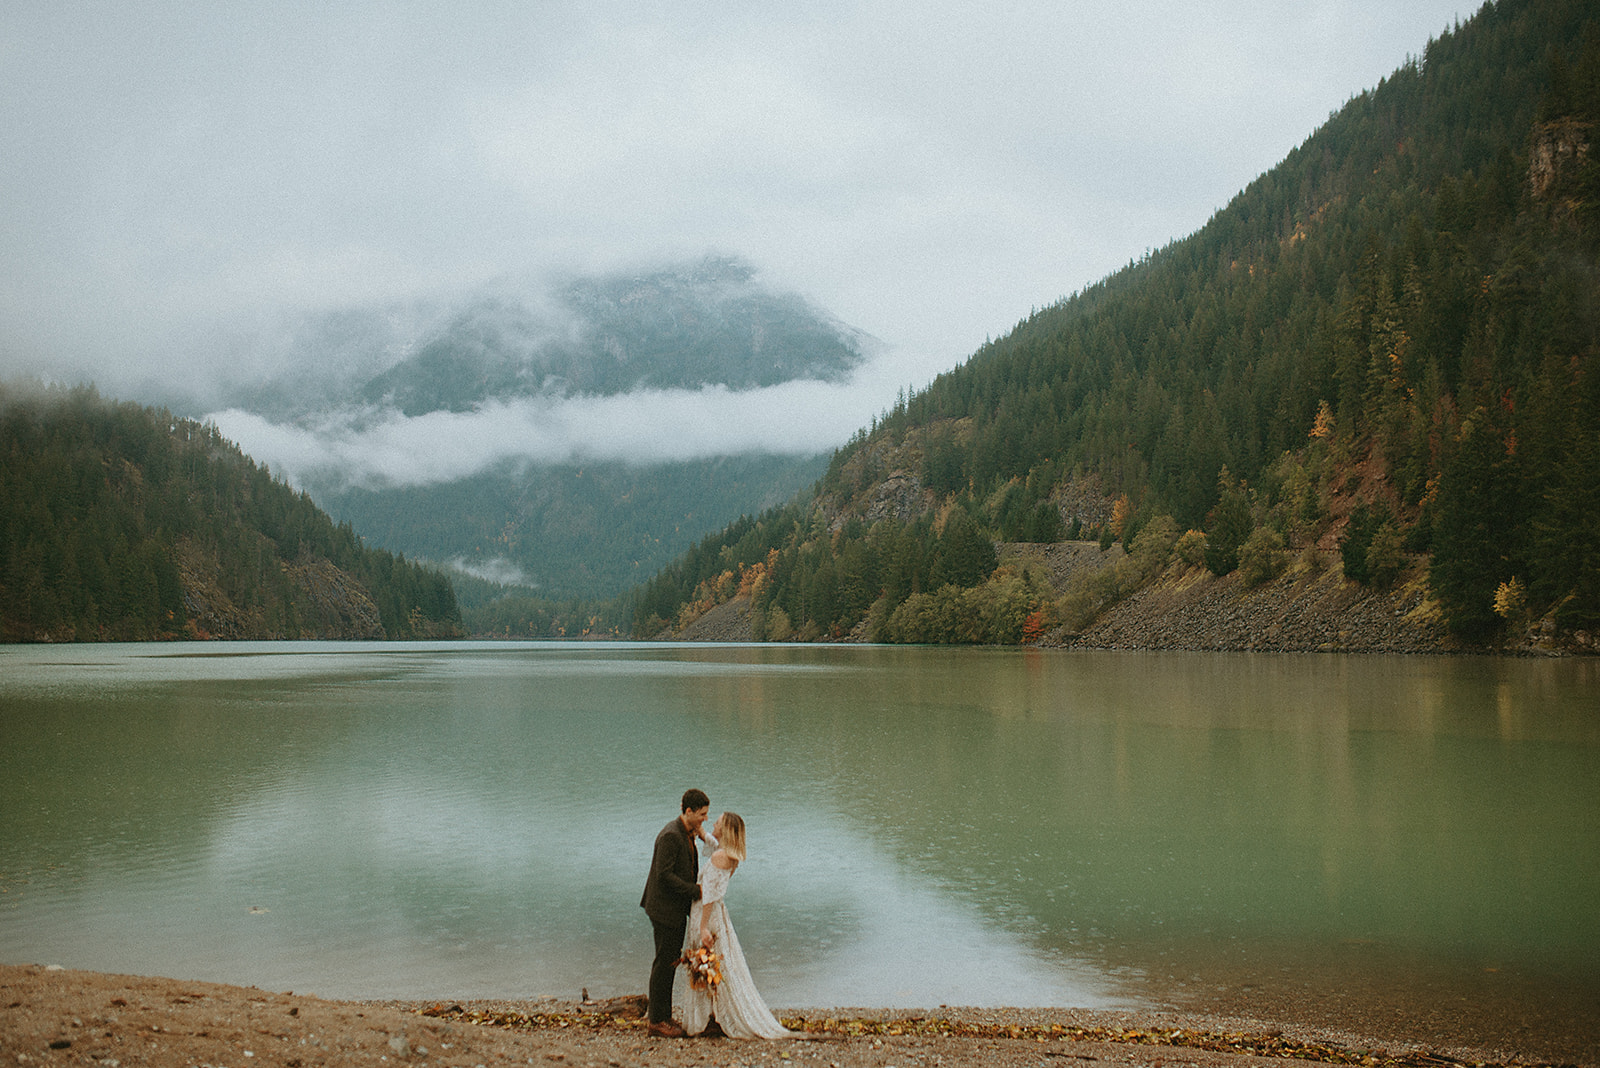 How to Elope in a National Park